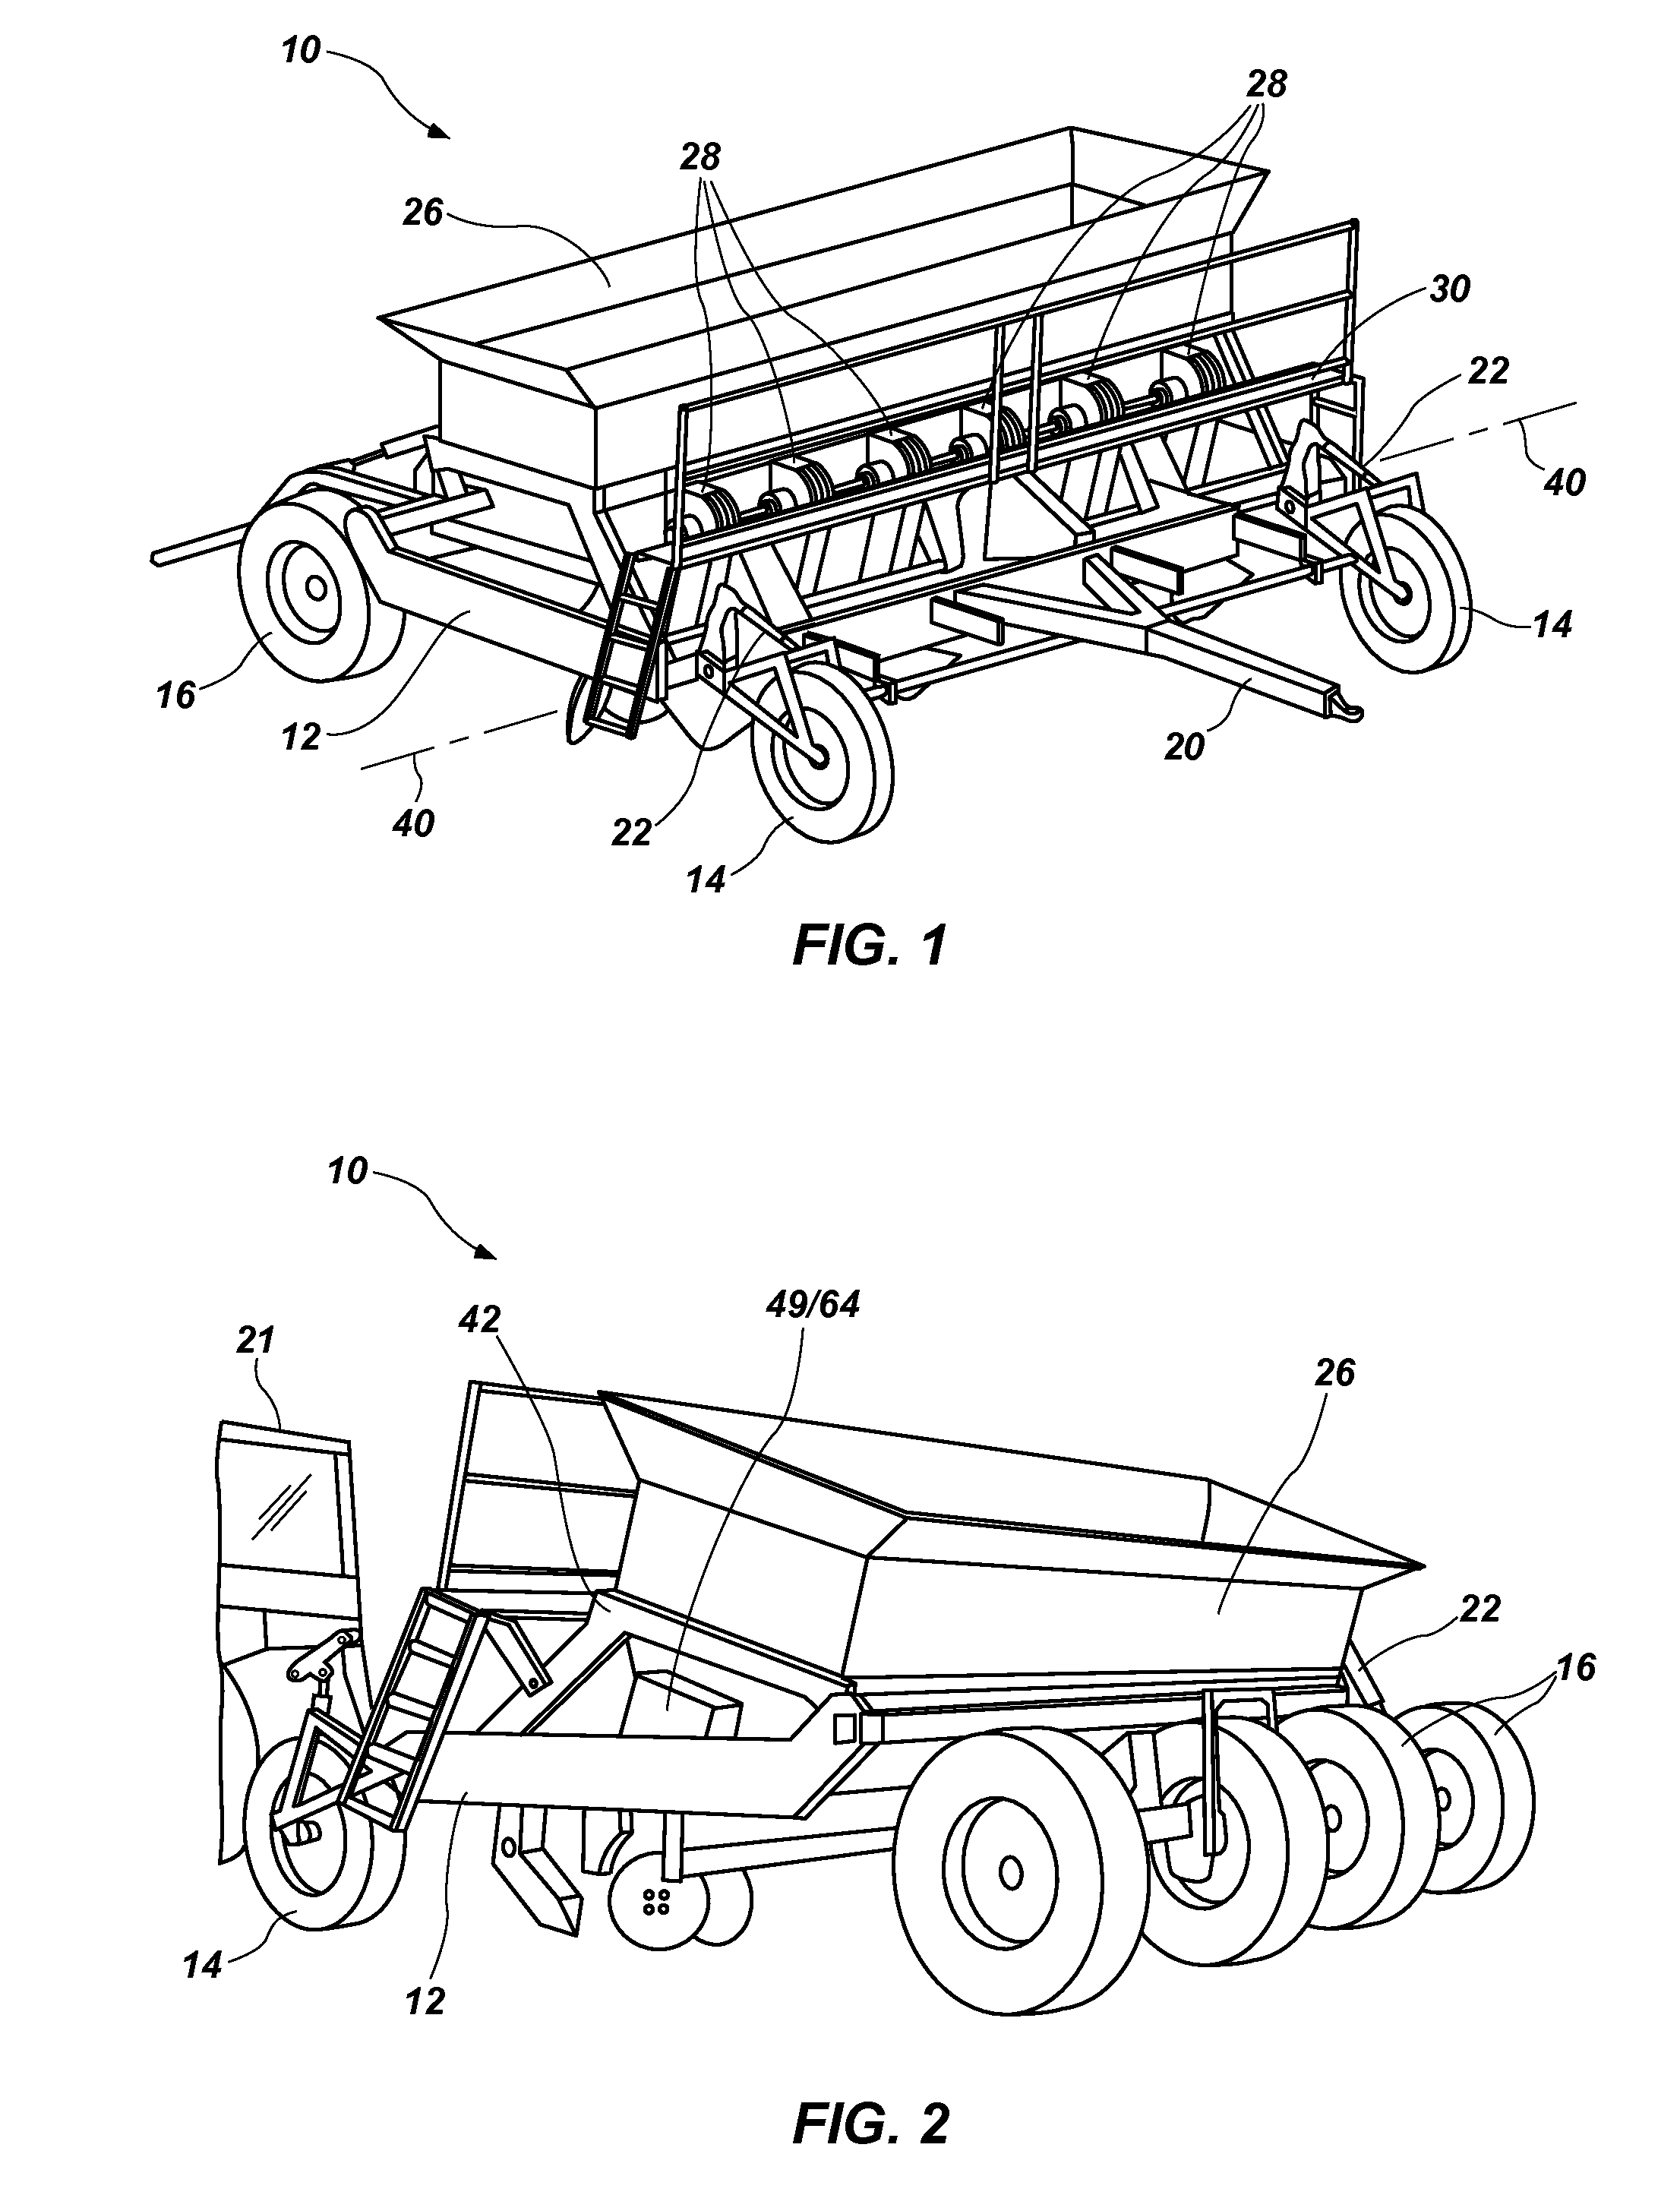 Hill-compensating planter and method